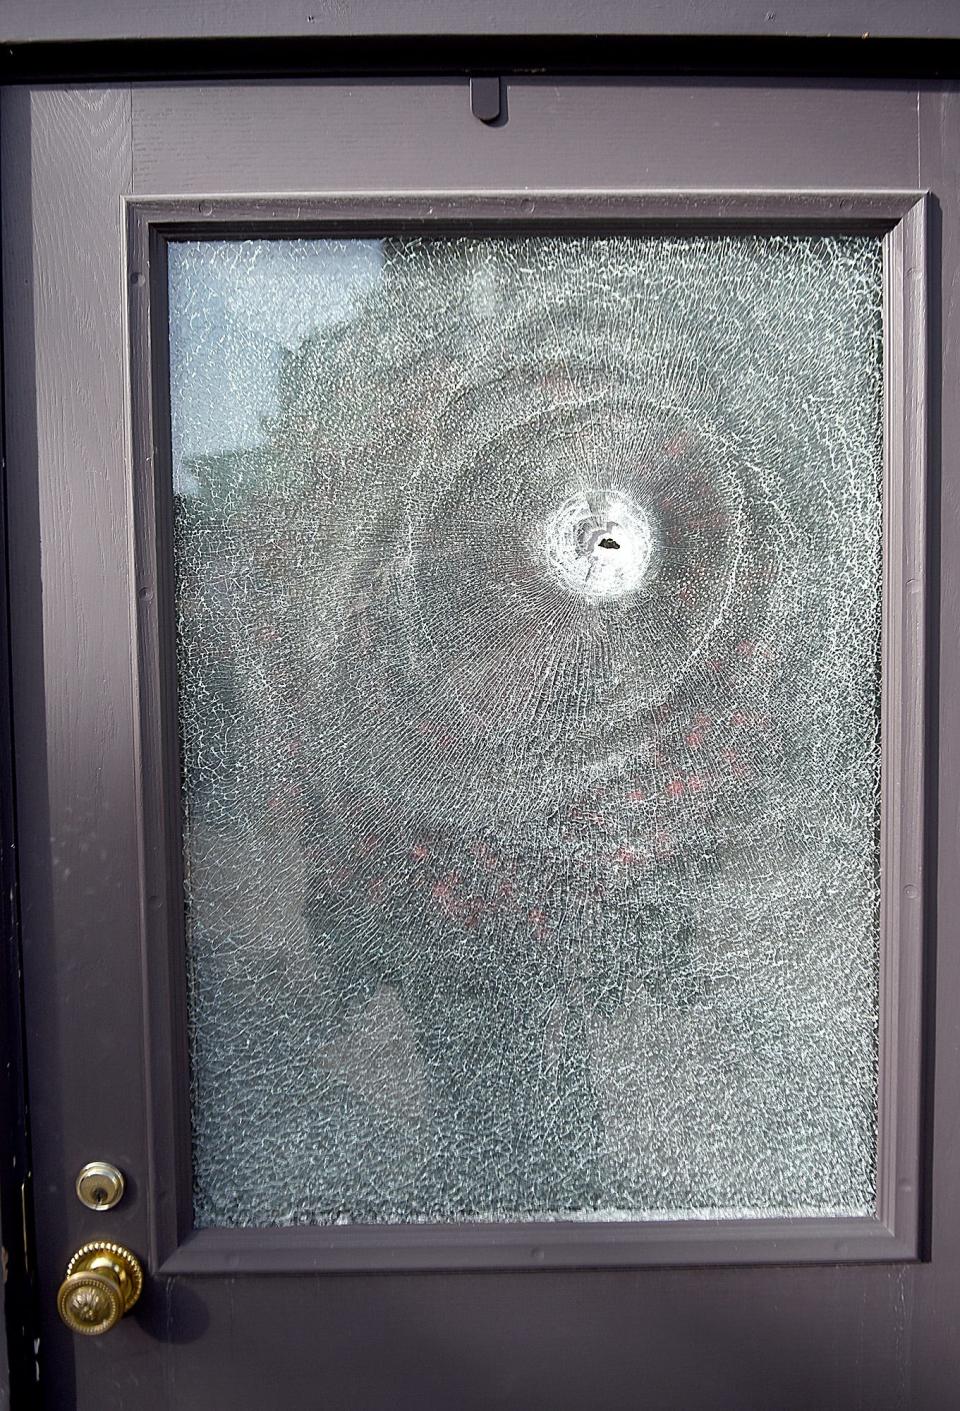 A window in the back door of the Blind Boone Home at 10 N. Fourth St. was struck by gunfire in what police suspect was a result of the gunfight that occurred Nov. 14 outside Vibez Lounge at 19 N. Fifth St.